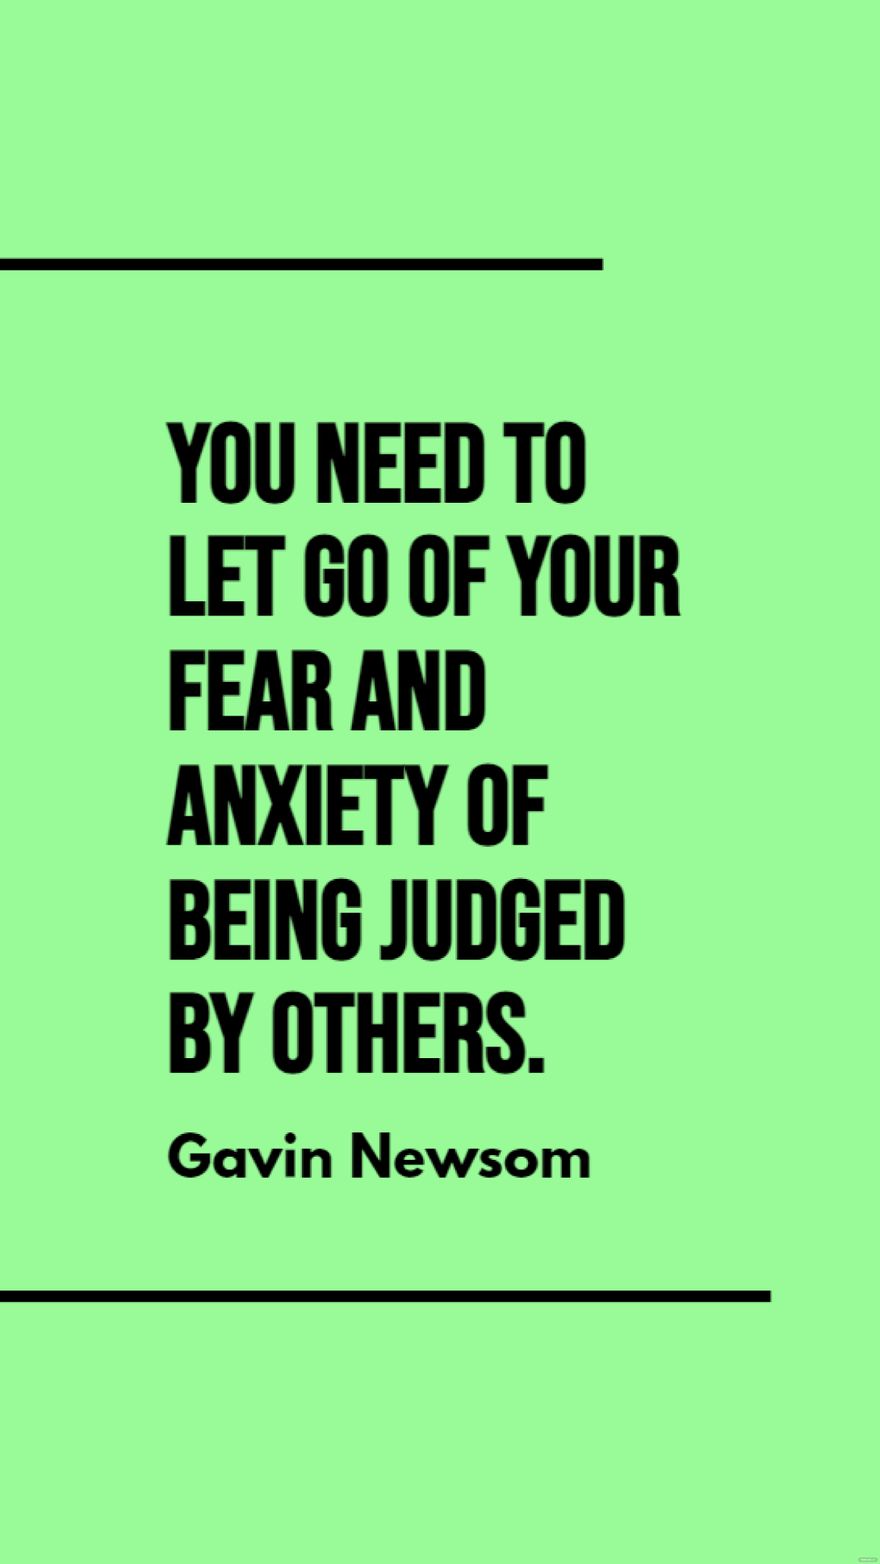 Free Gavin Newsom - You need to let go of your fear and anxiety of being judged by others. in JPG